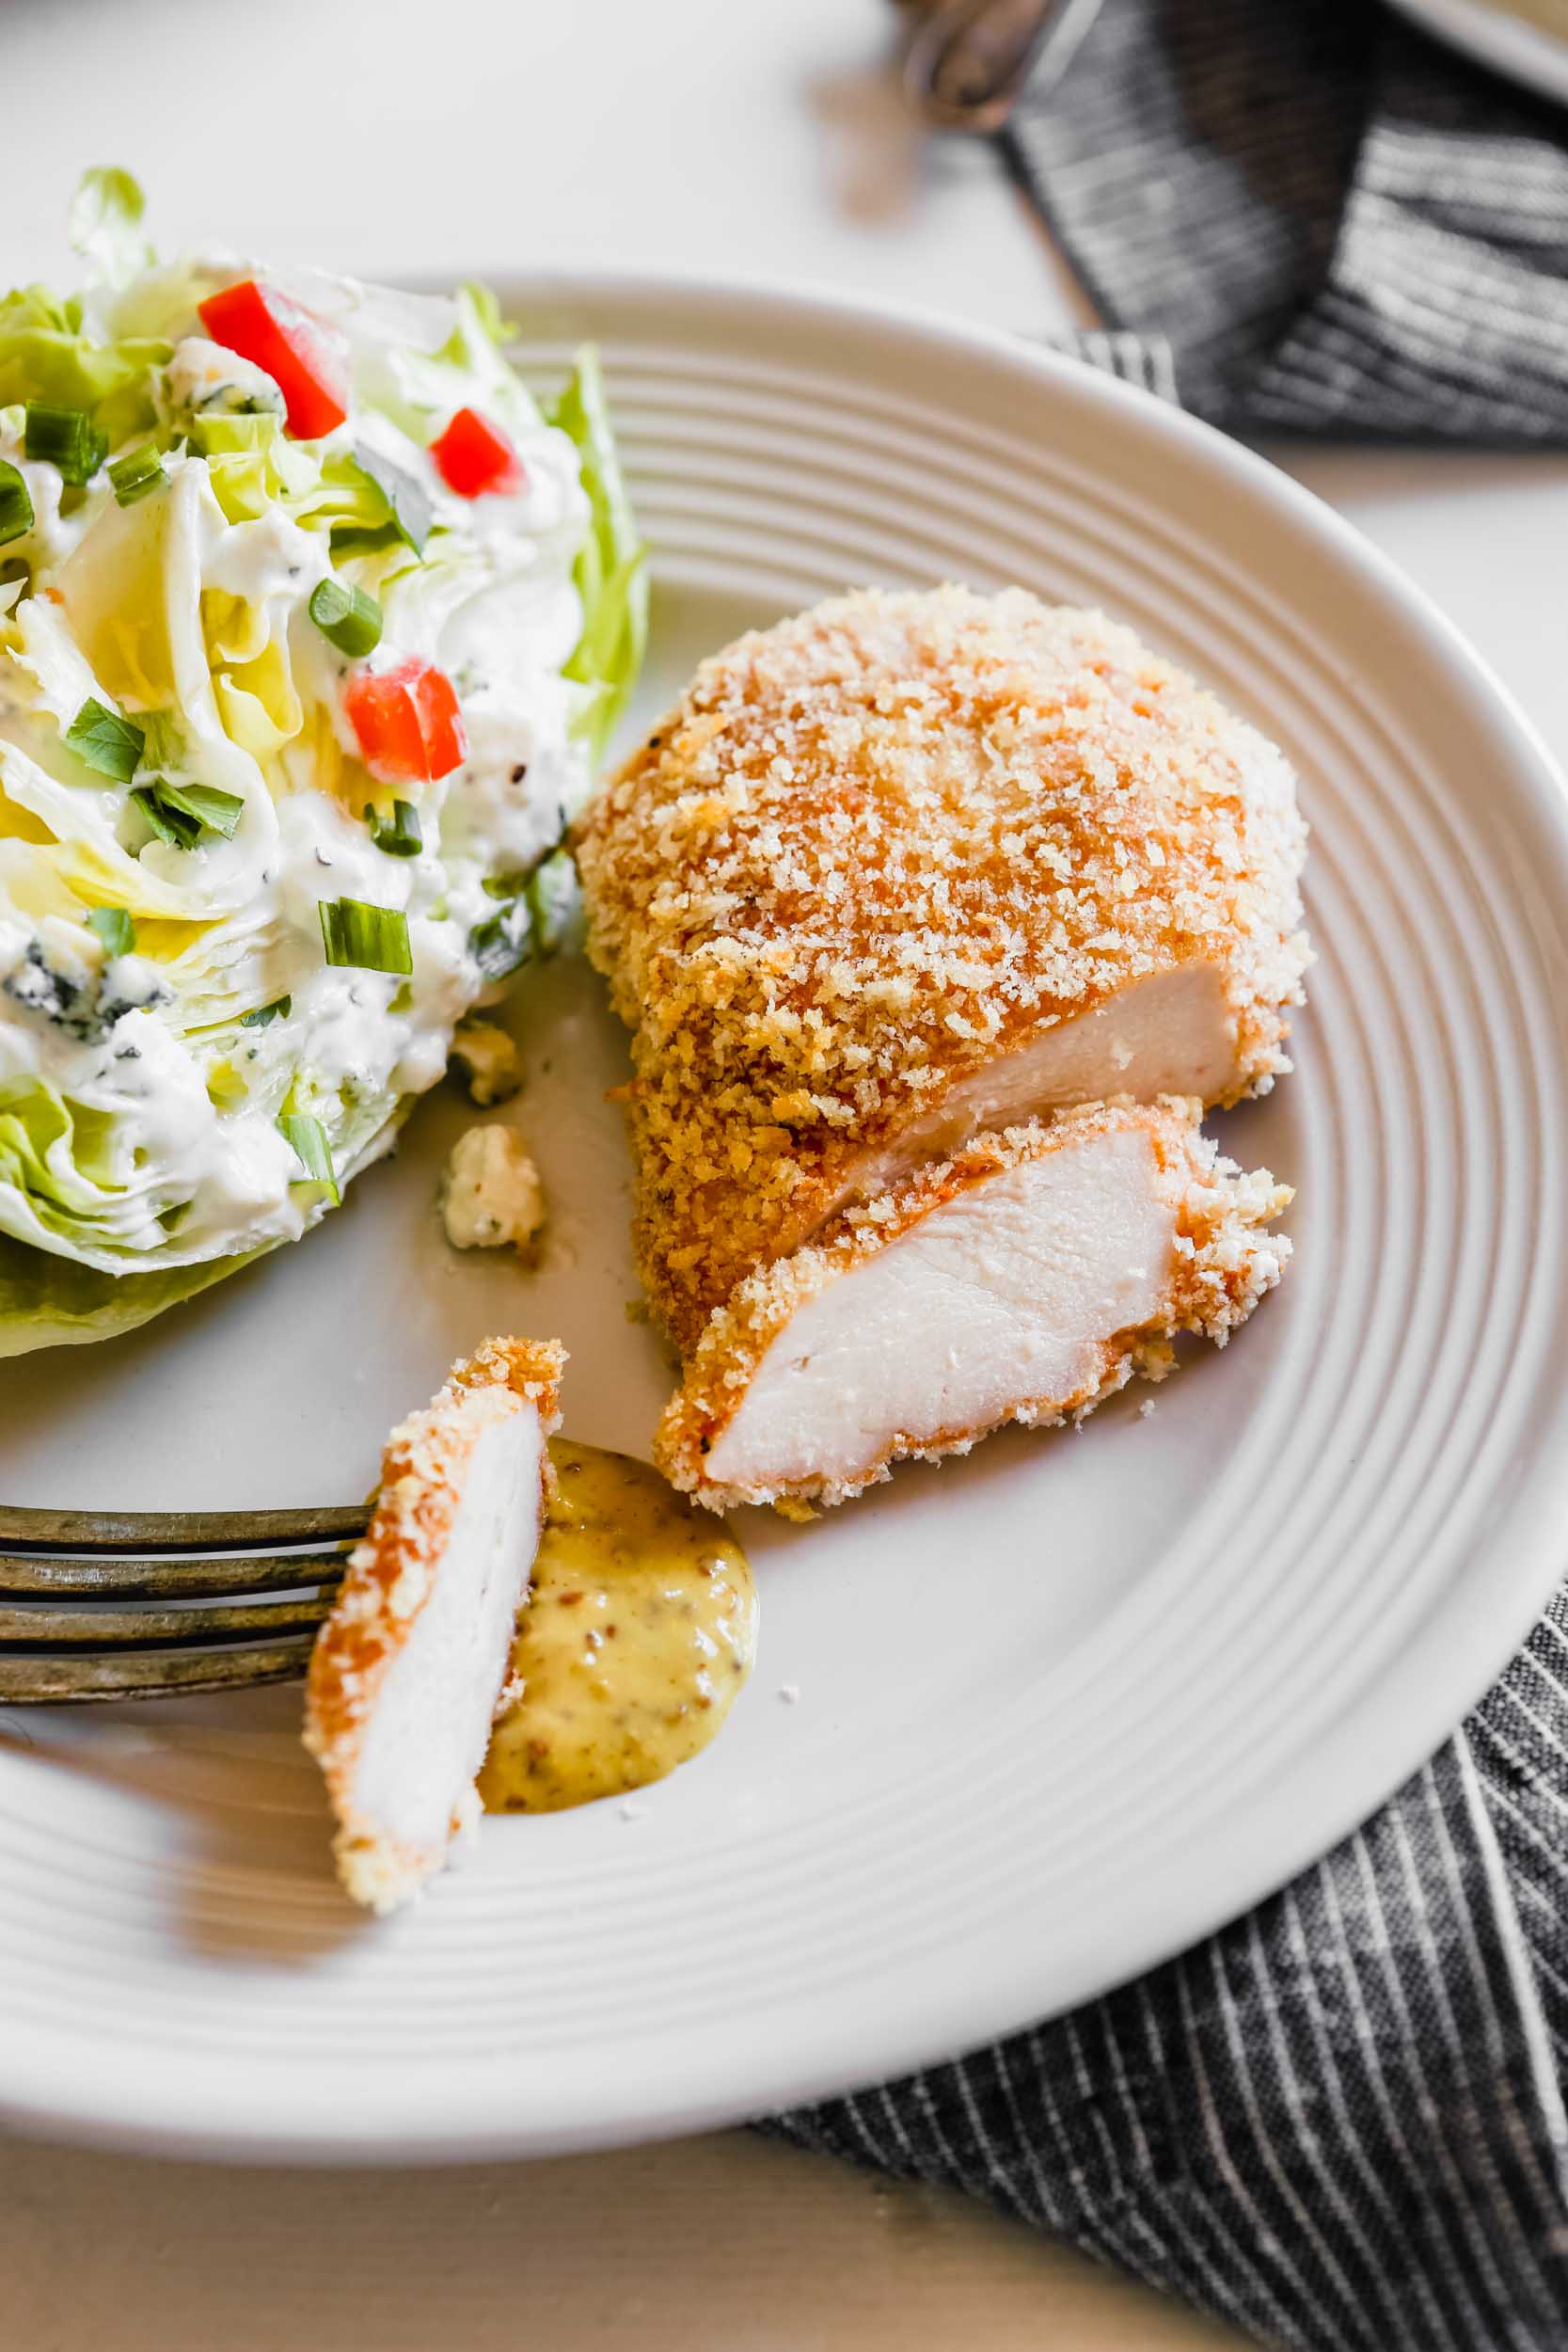 Photograph of oven fried chicken breast being cut on a plate with a wedge salad